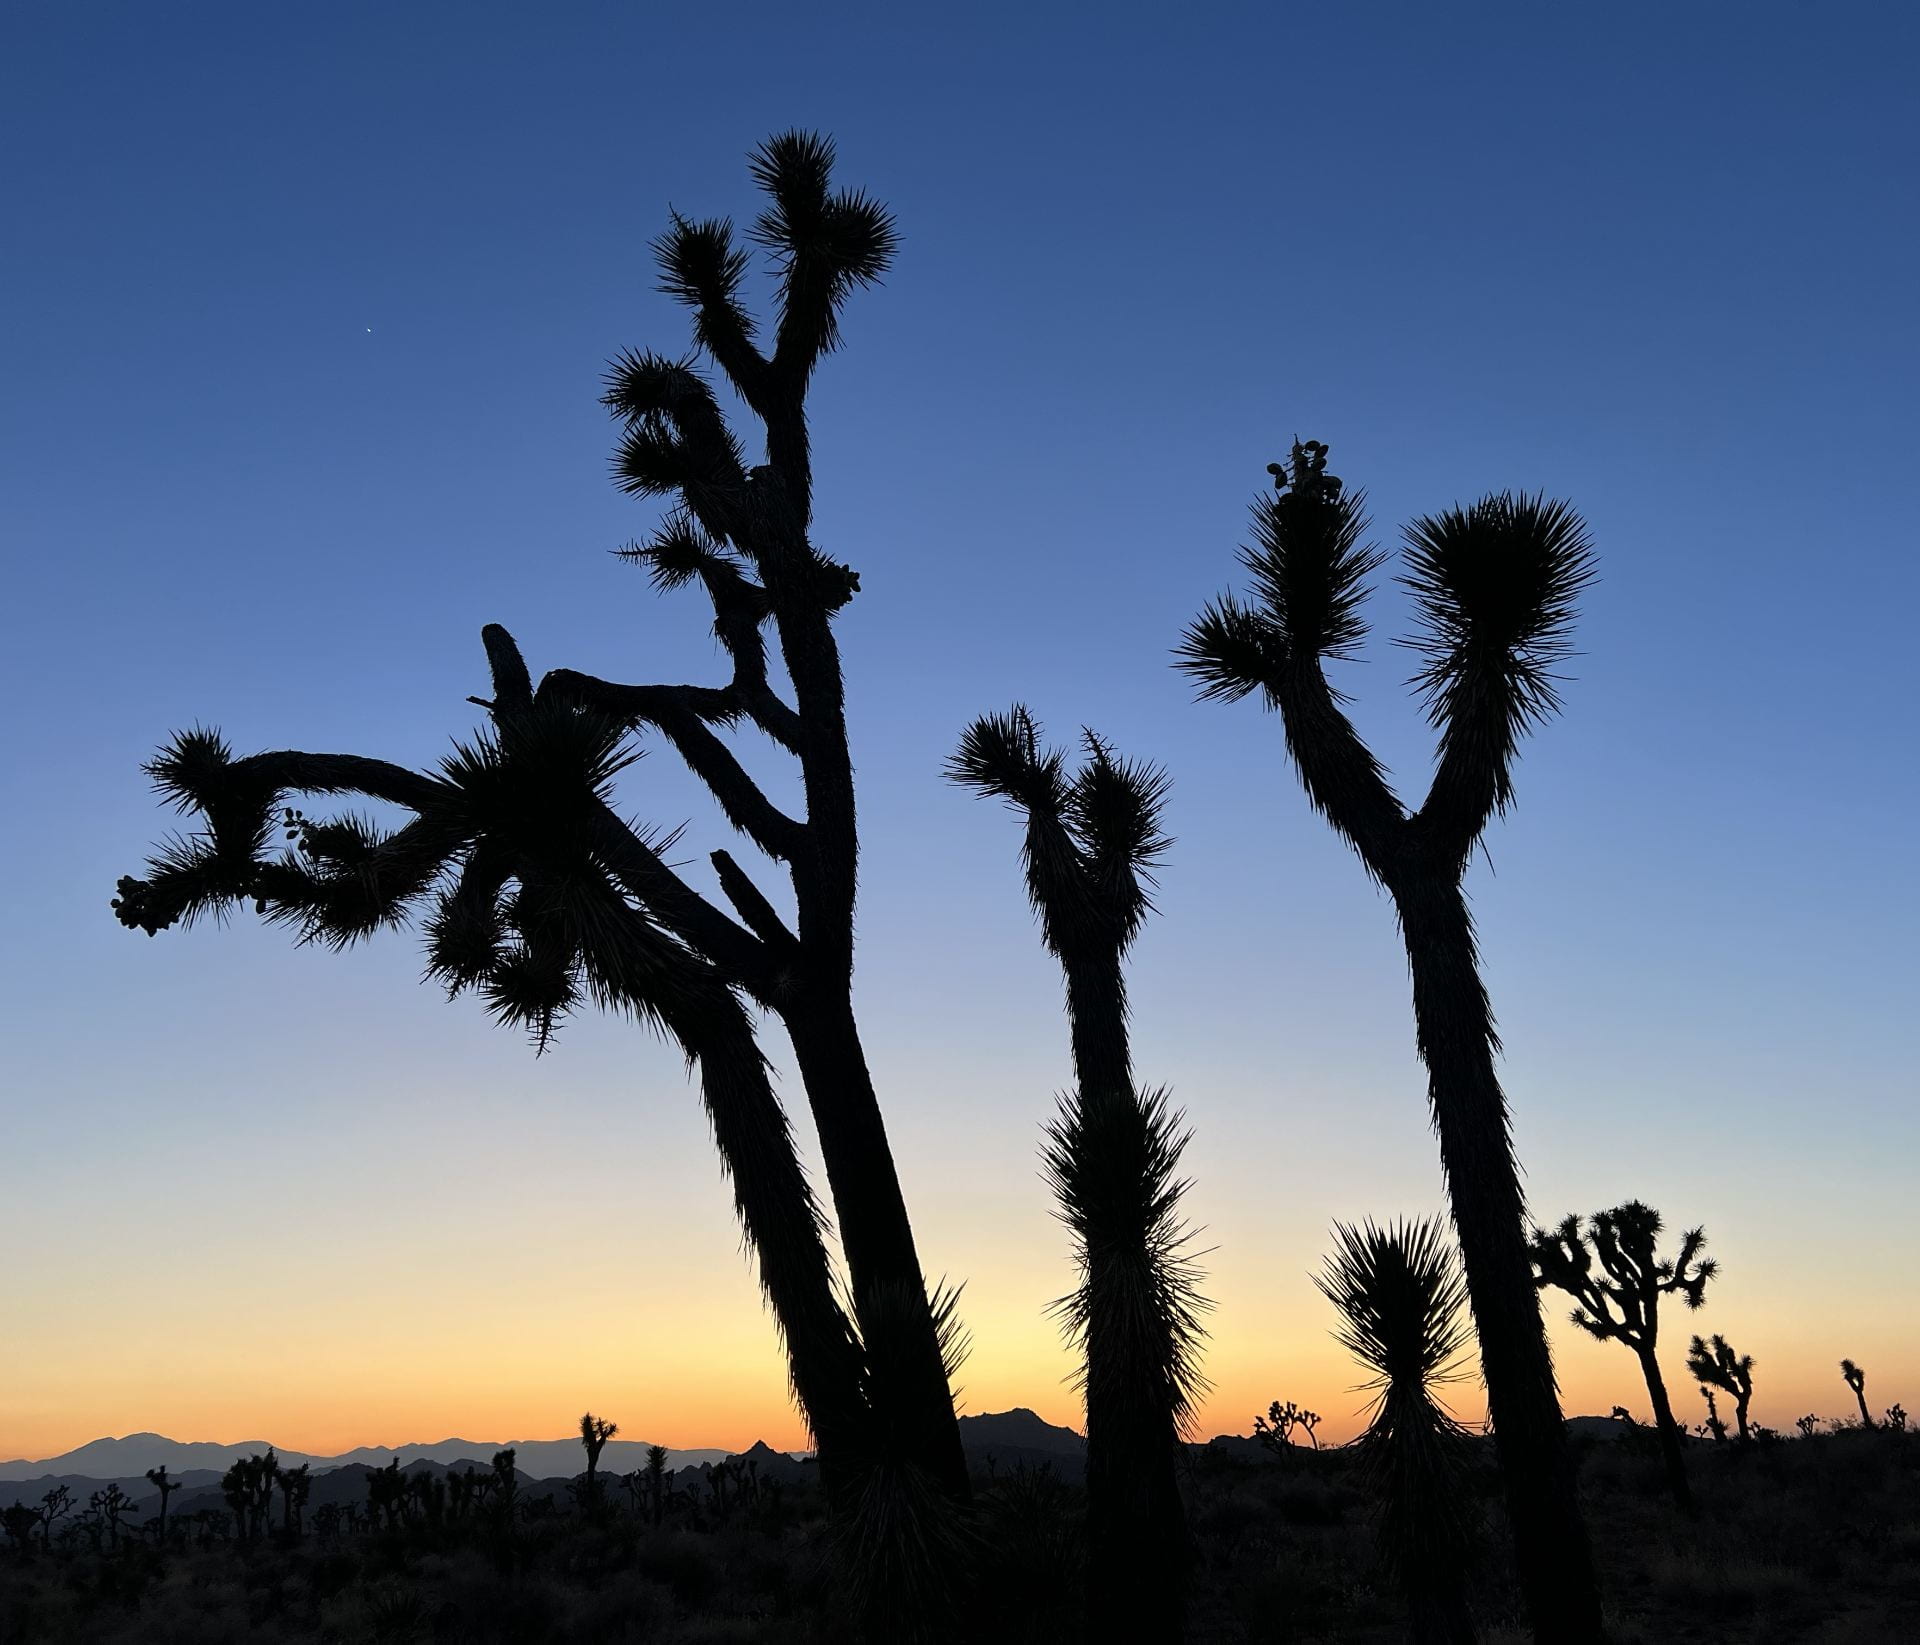 joshua tree forest at sunset